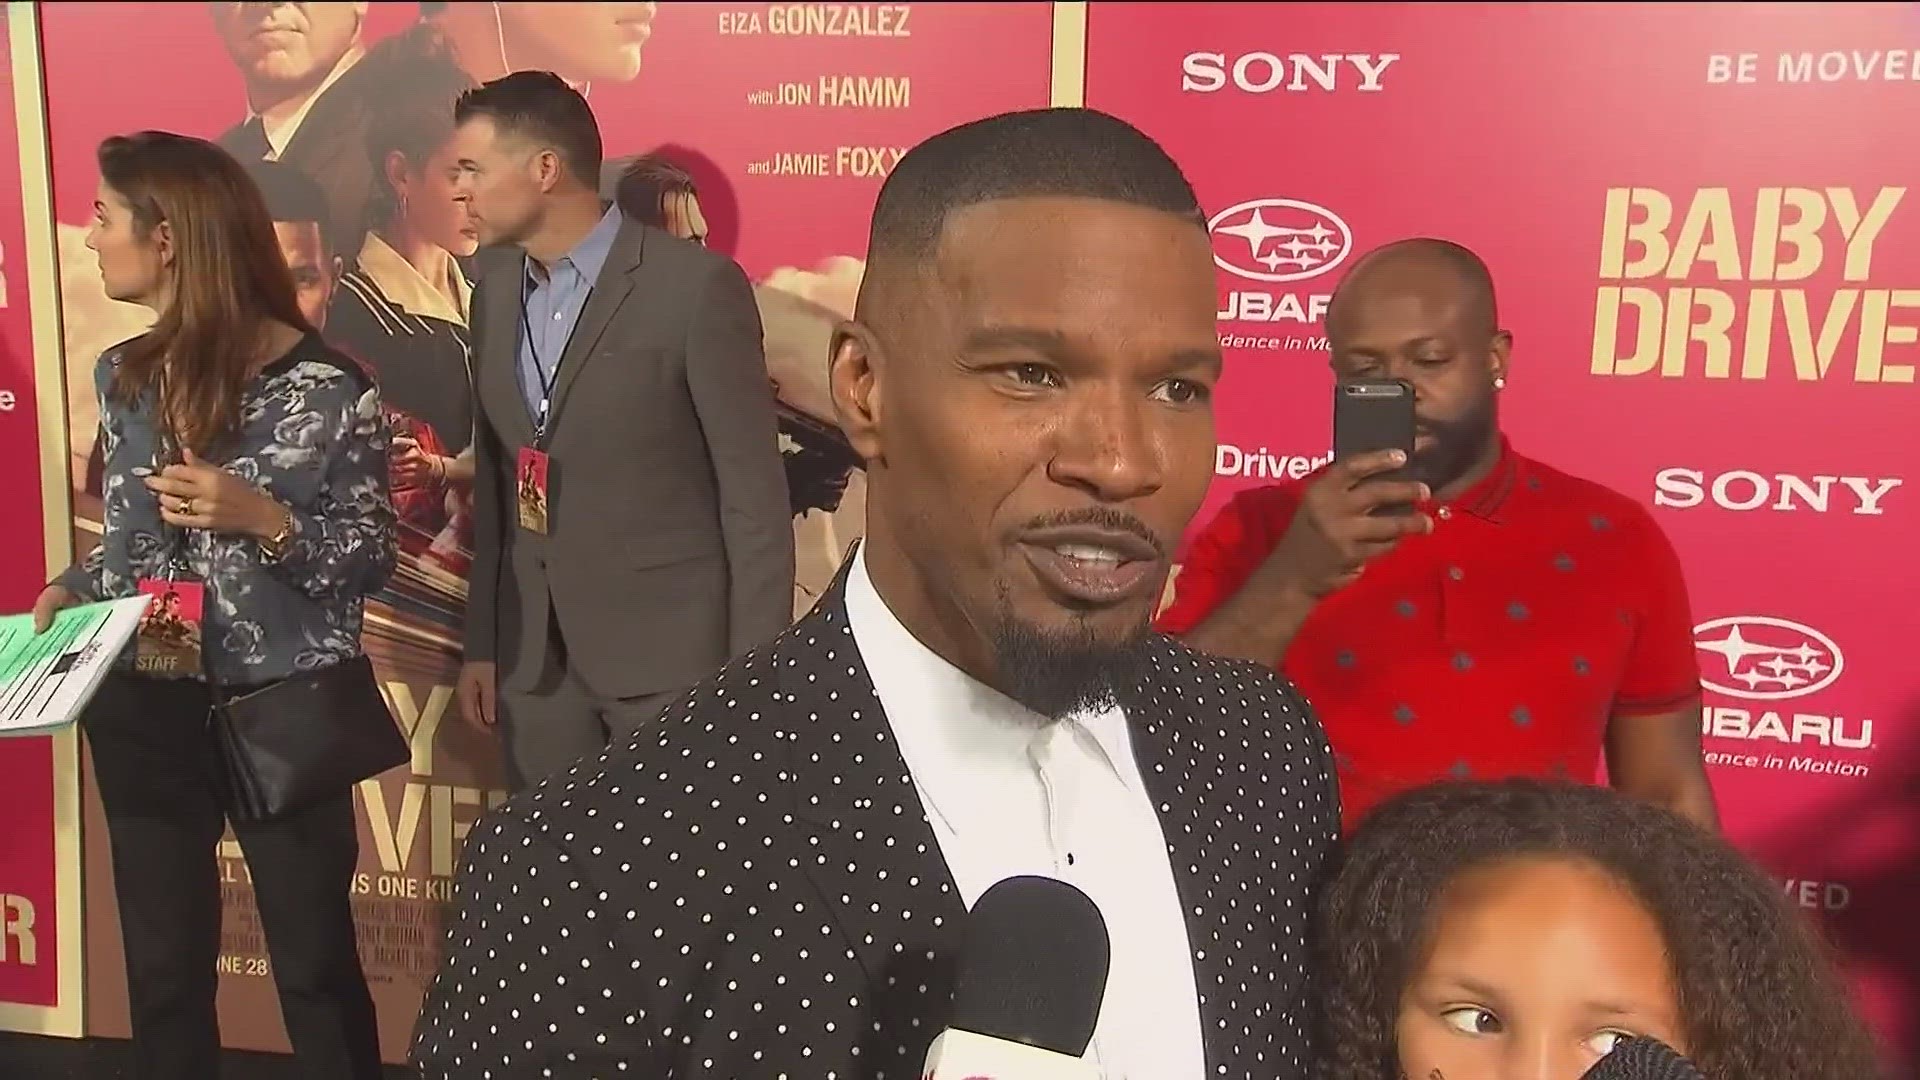 Actor Jamie Foxx has been in the hospital after having a medical emergency, according to his daughter. The actor is now awake and alert.